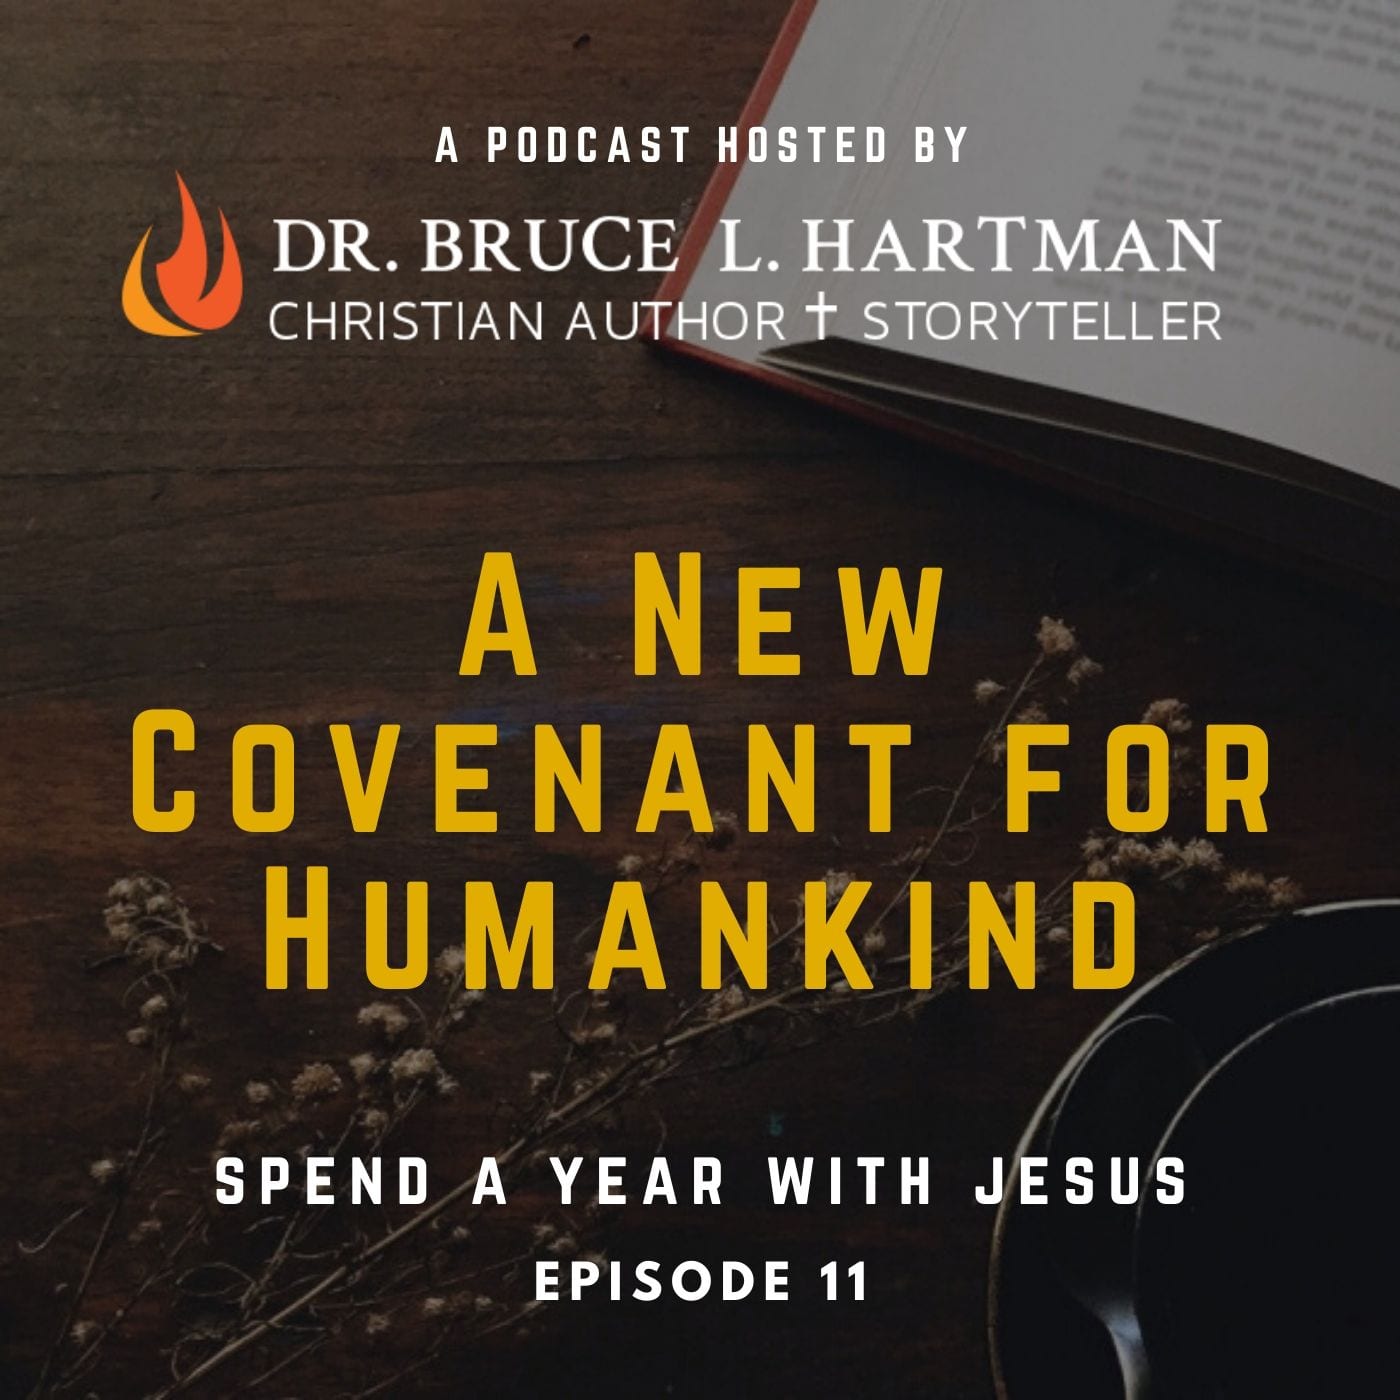 New Covenant for Humankind